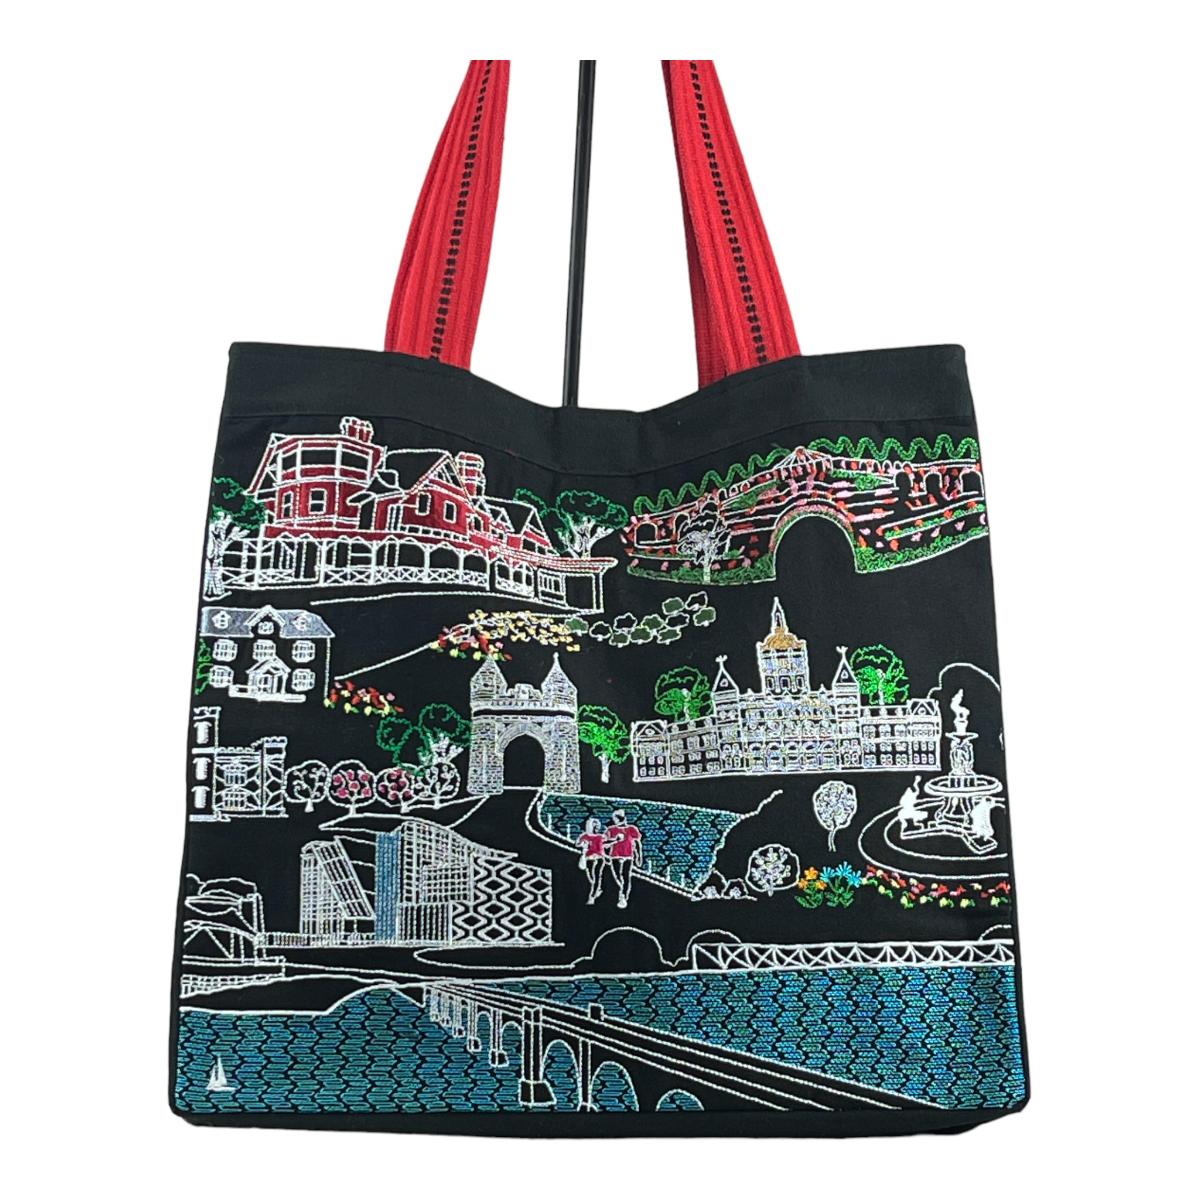 Embroidered Hartford Connecticut Tote Bag